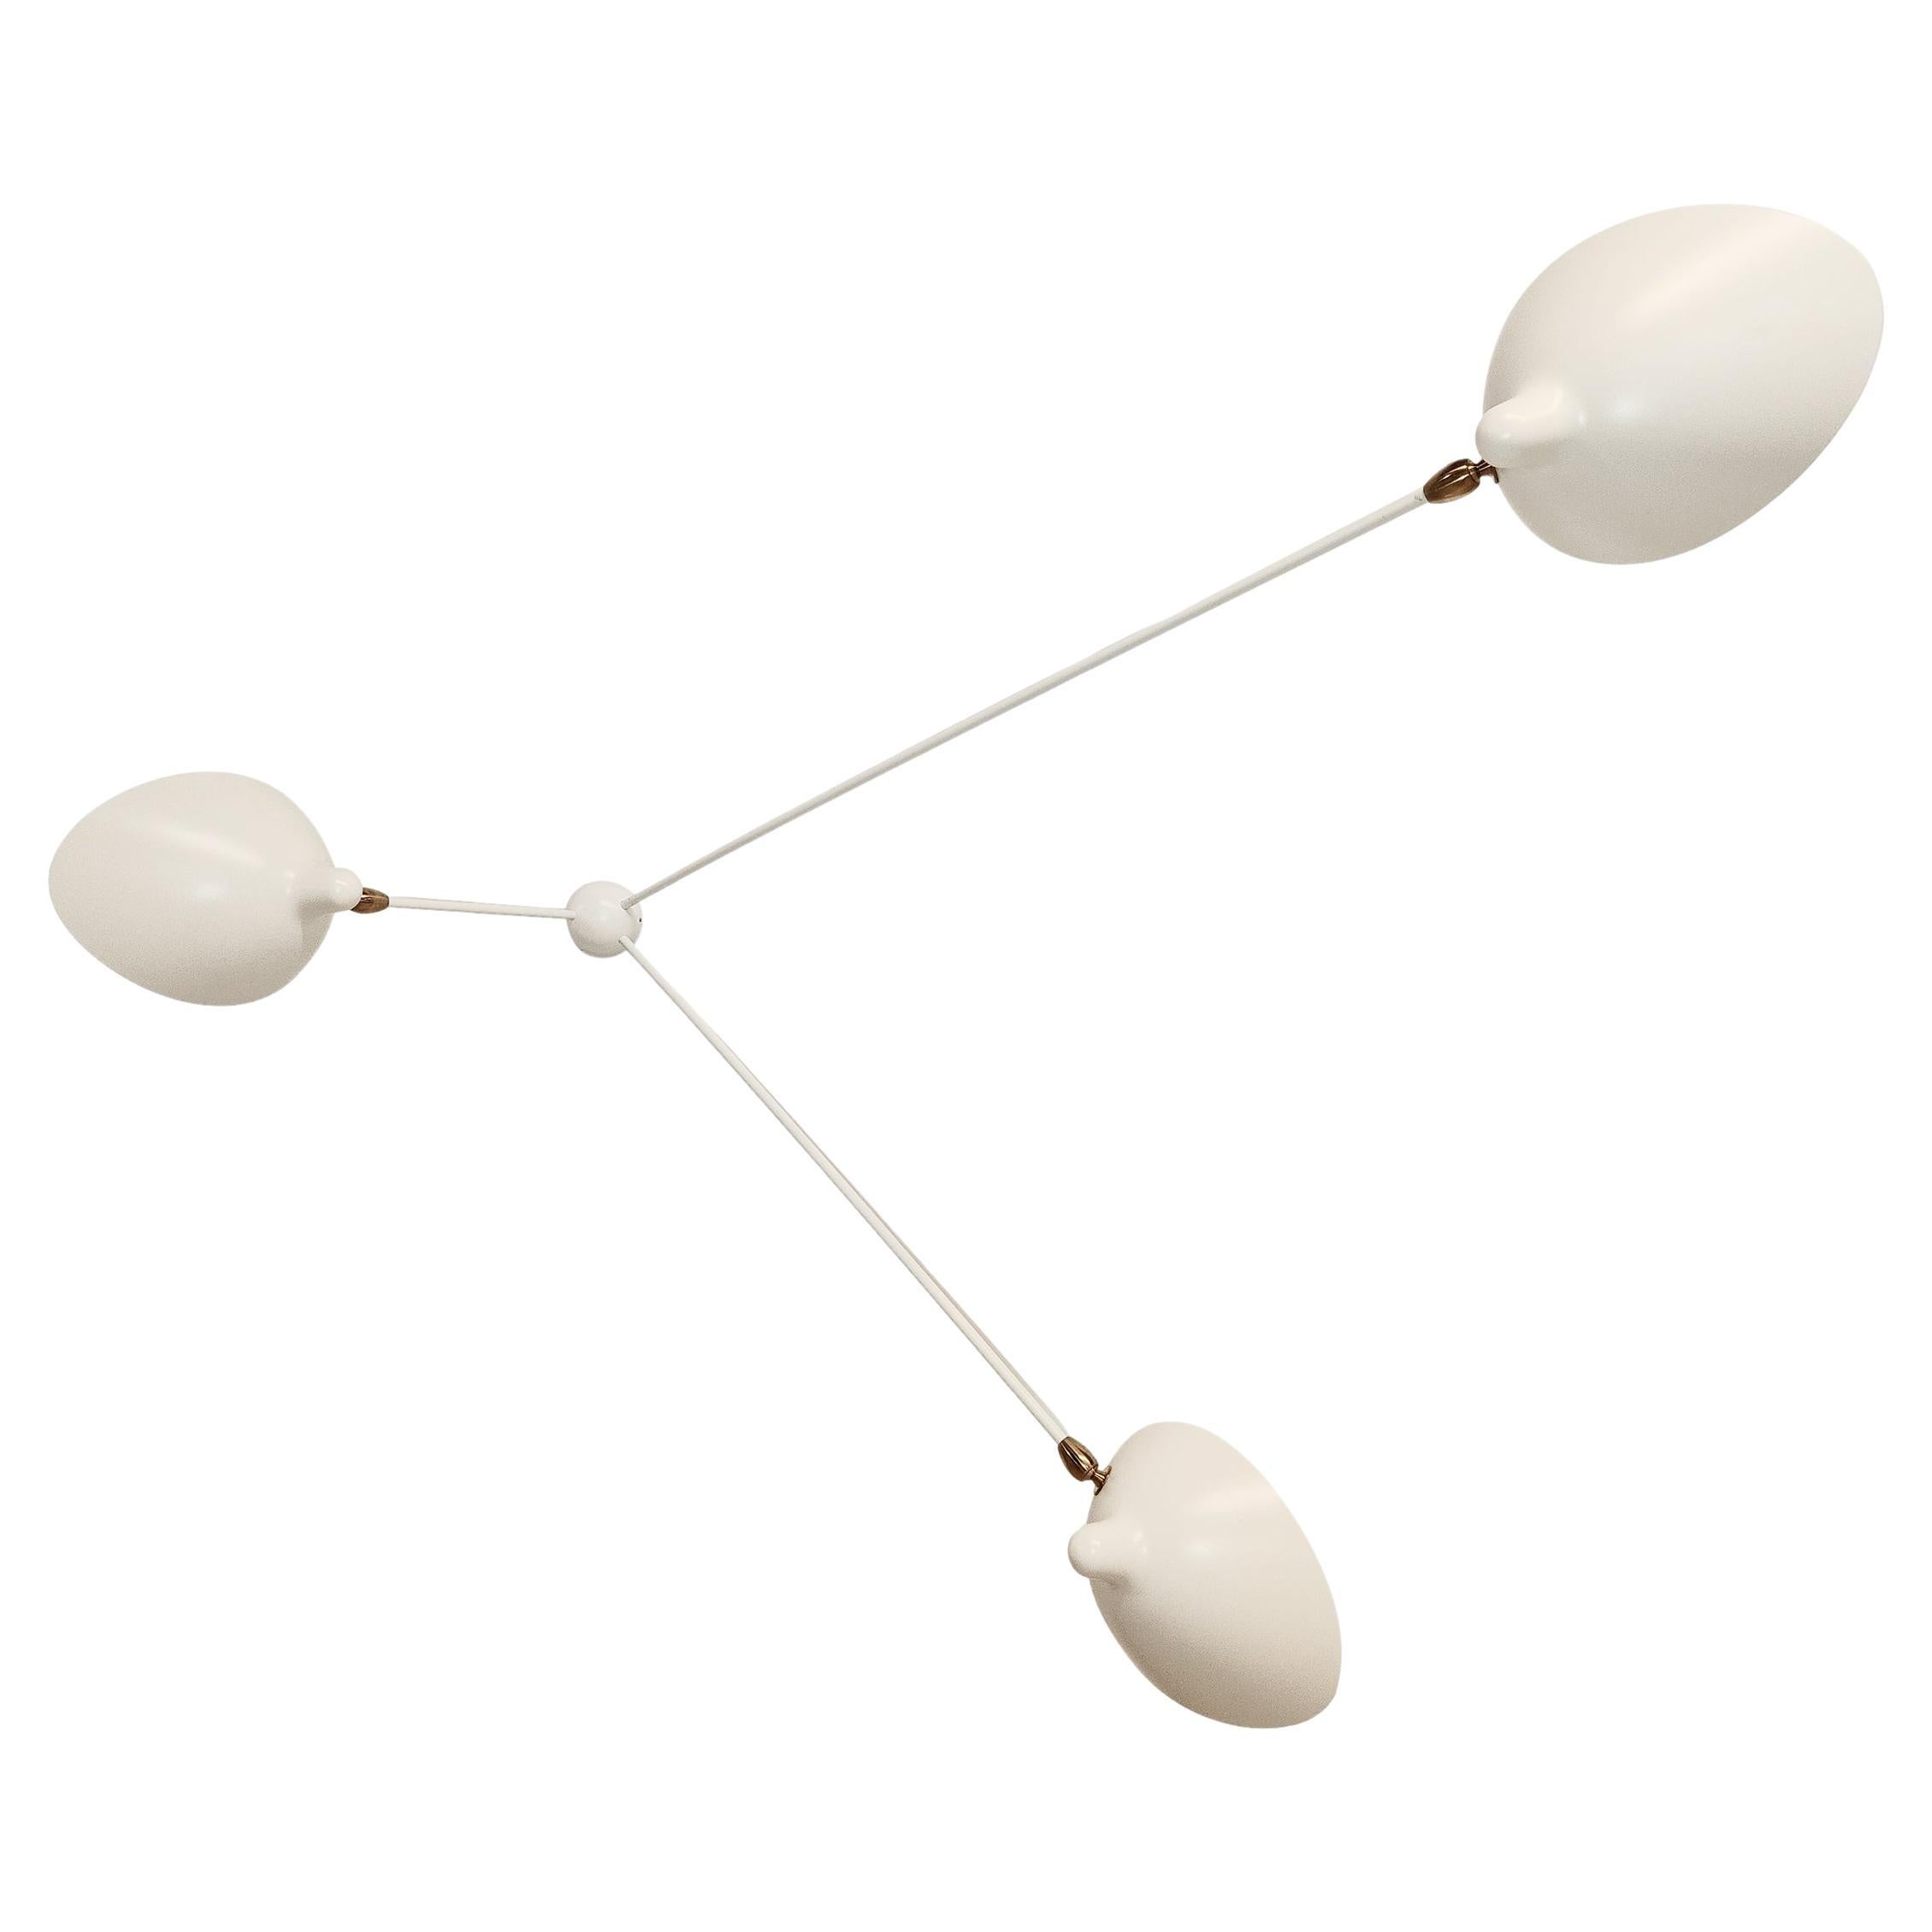 Serge Mouille - Spider Sconce with Three Arms in White - IN STOCK!